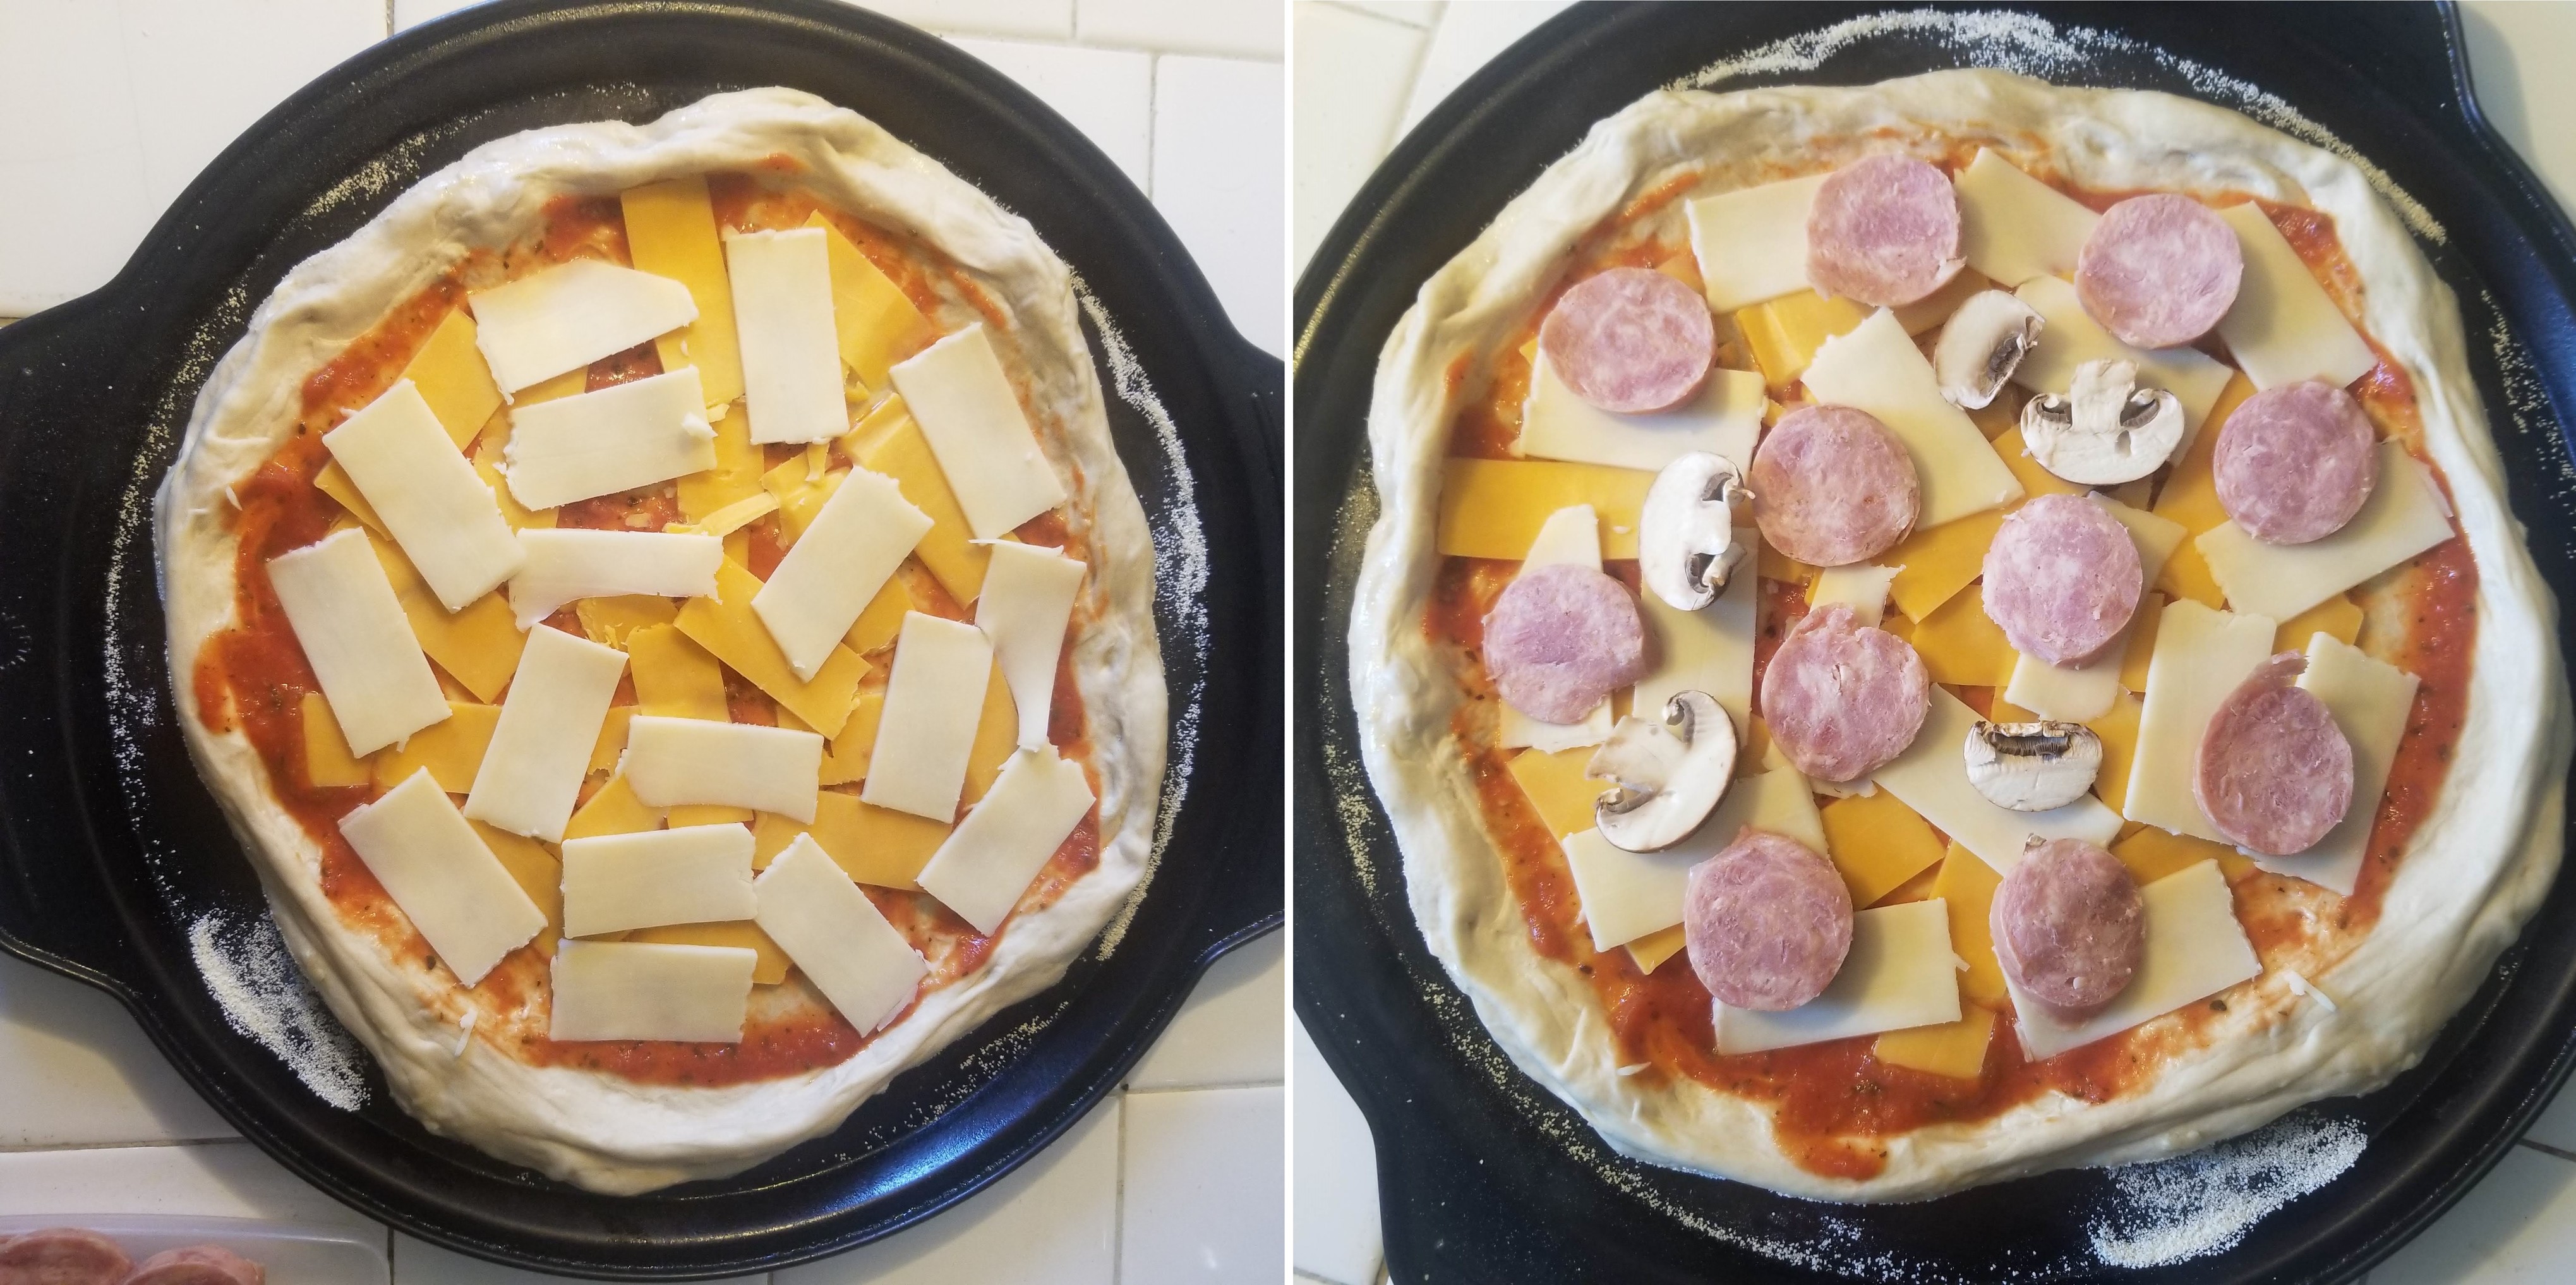 2 pictures side-by-side. Pic 1 is an uncooked cheese pizza. Pic 2 is an uncooked pizza with sliced sausage & mushrooms on it.